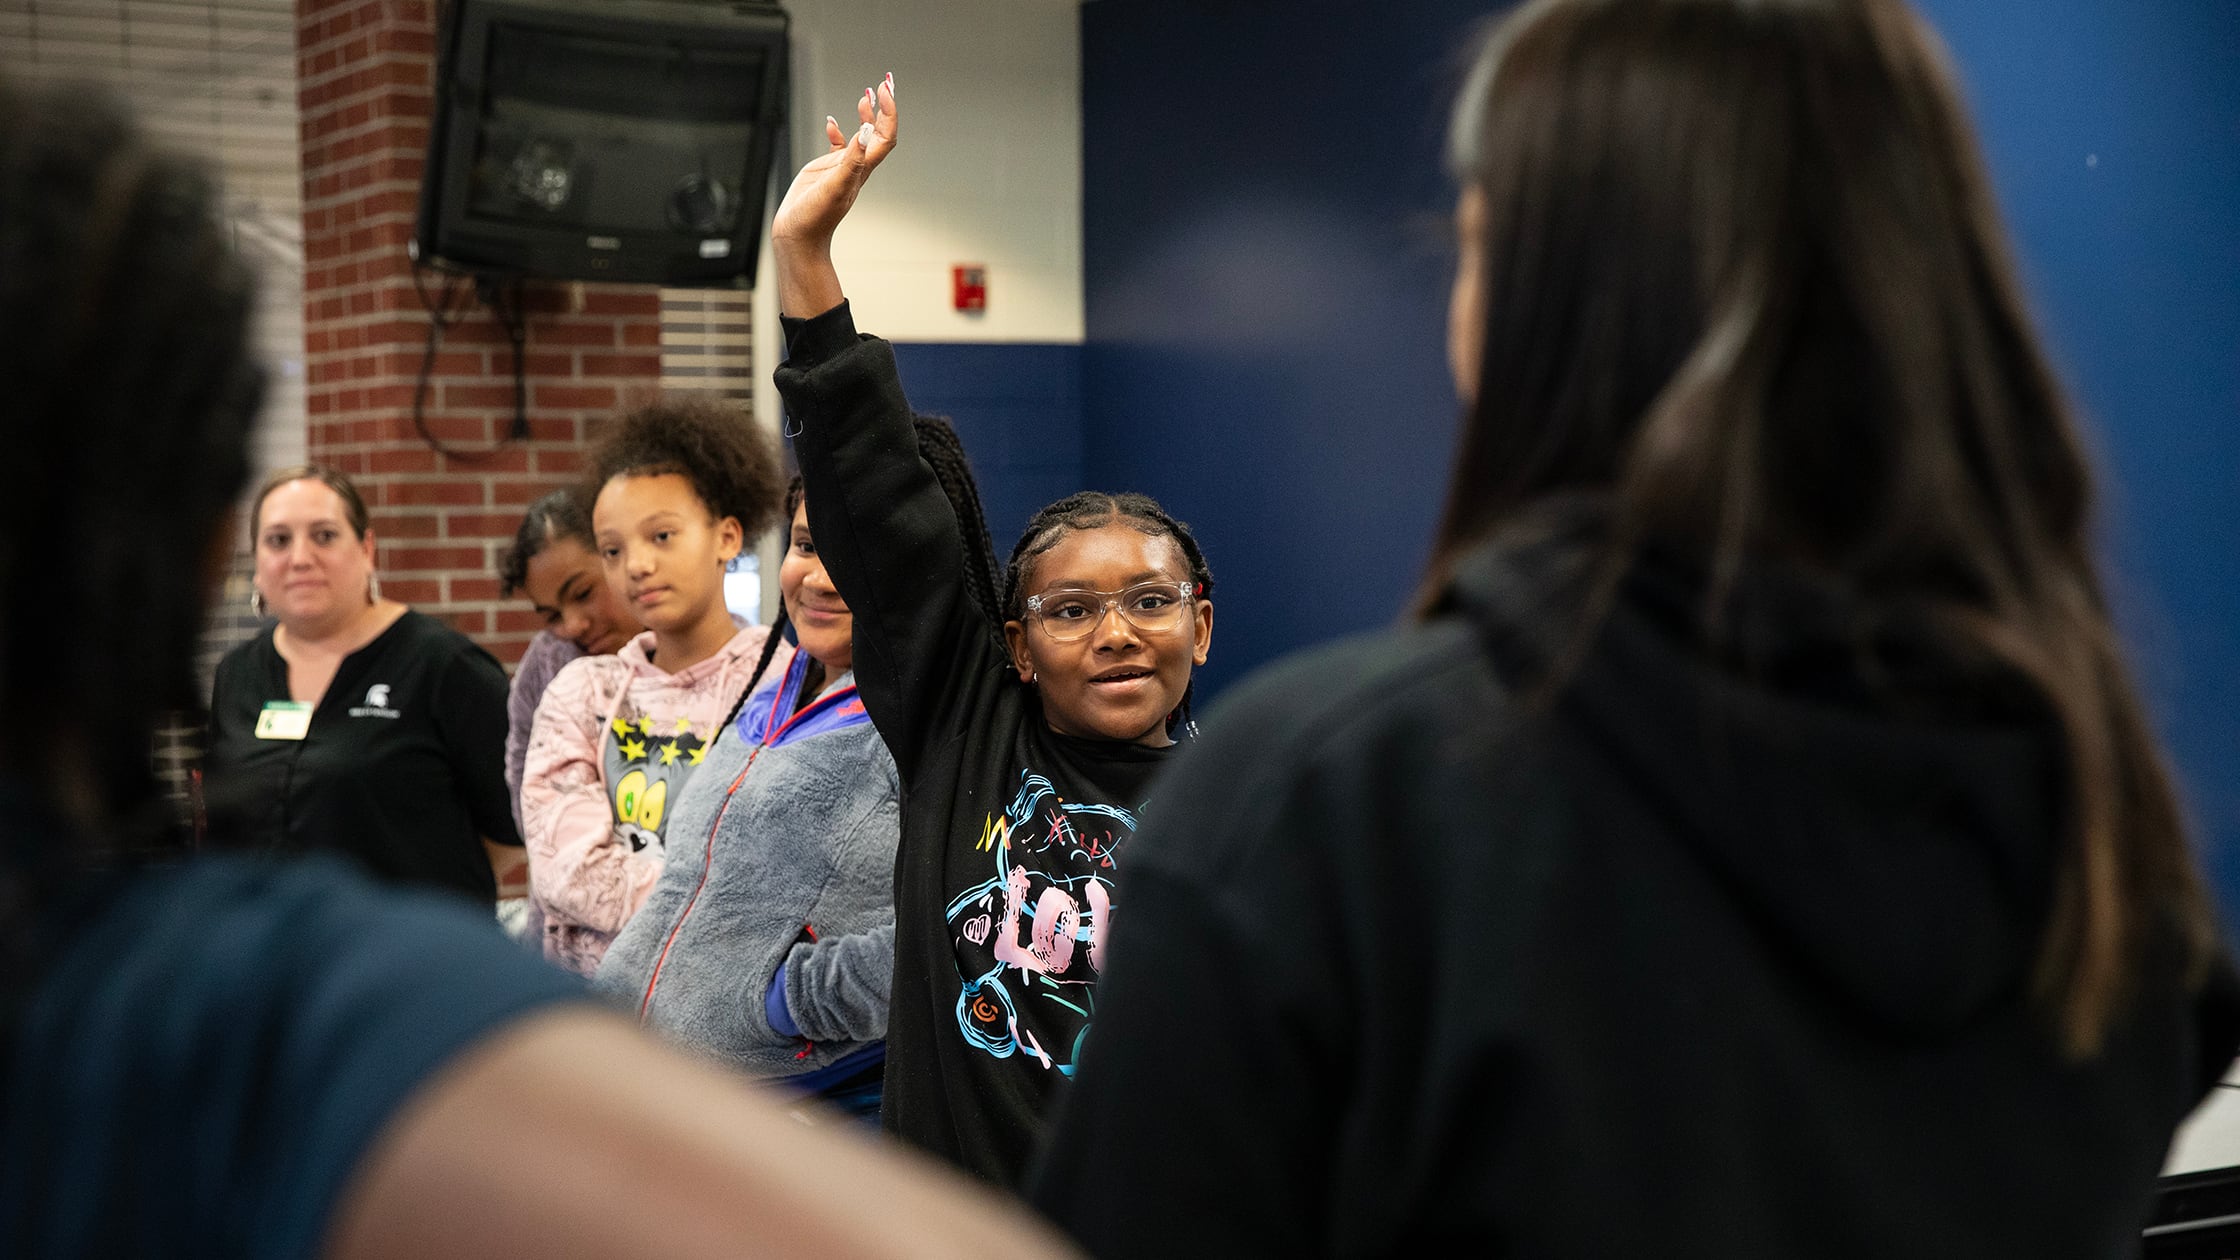 A student wearing a black sweater holds her hand up in a circle of other students and adults. There is a dark blue wall and a red brick column in the background.